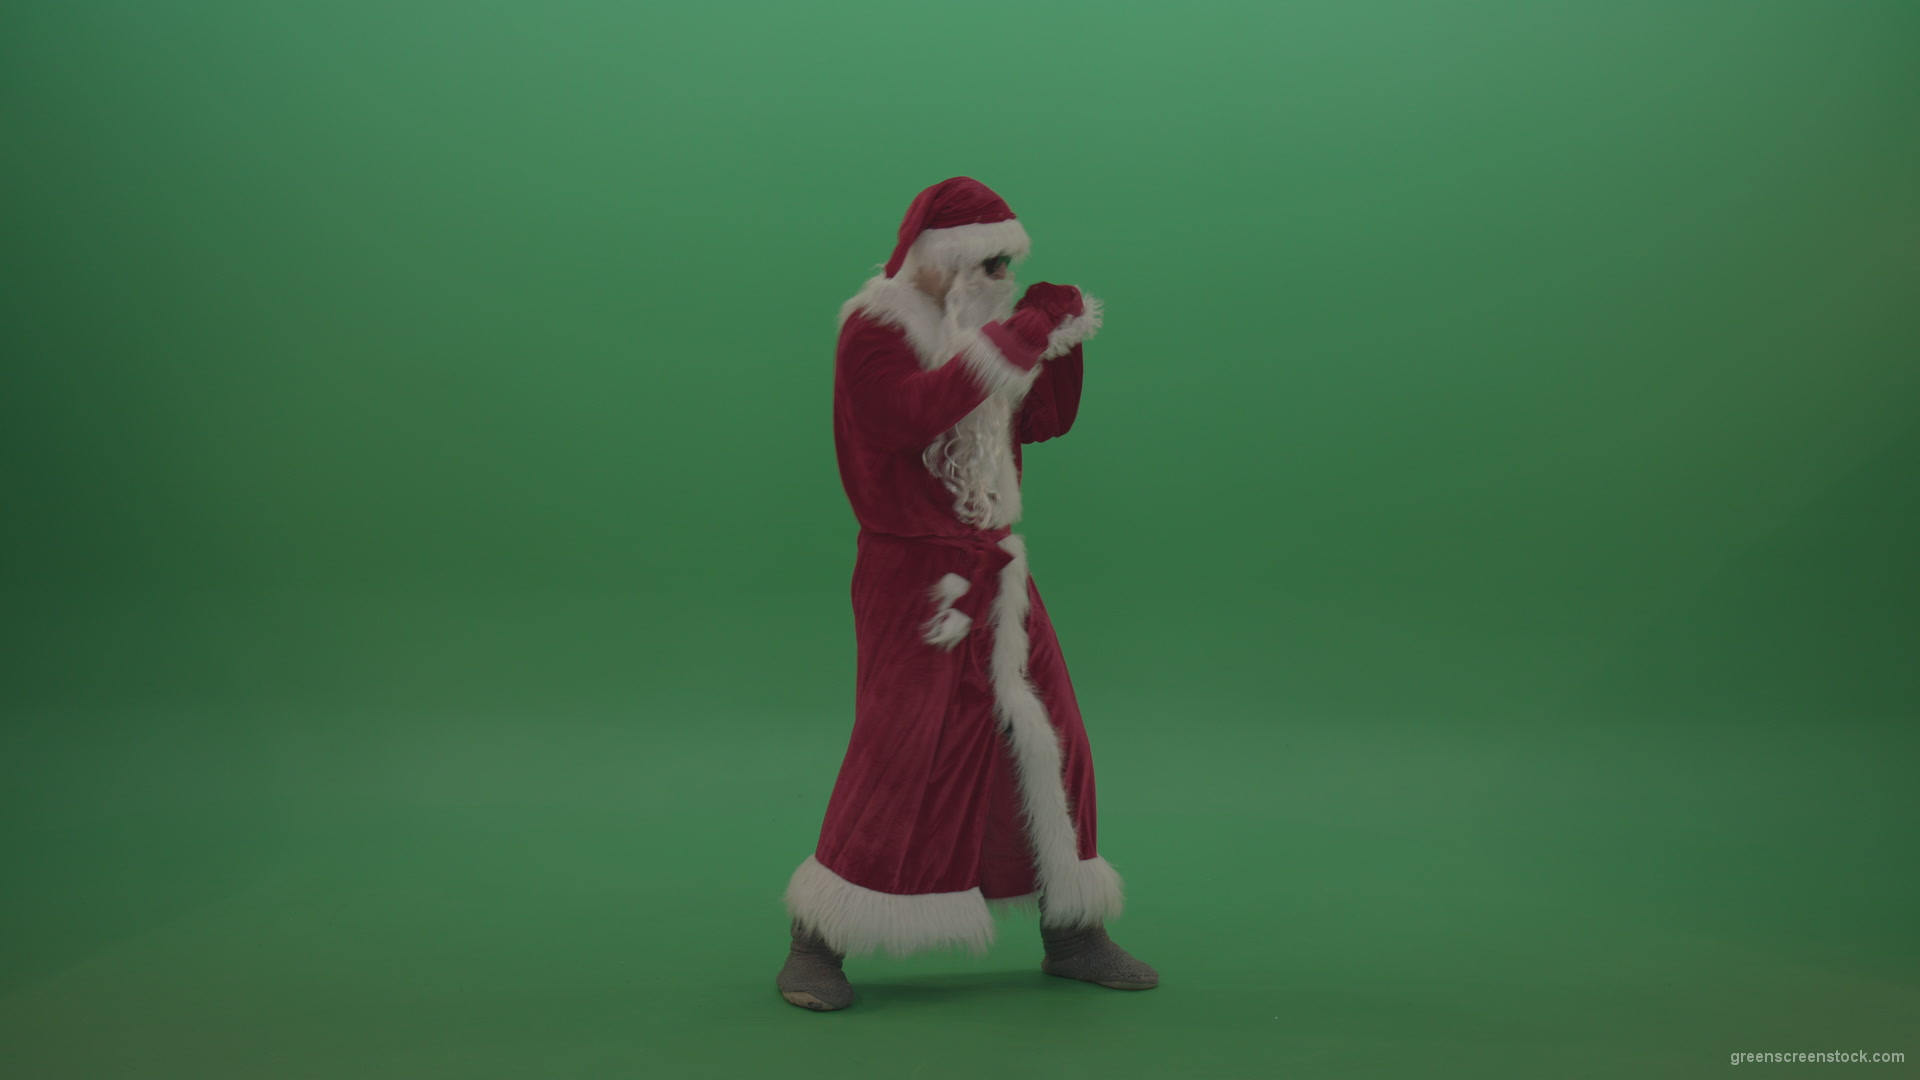 Santa-in-black-glasses-show-cases-his-boxing-skills-over-chromakey-background_004 Green Screen Stock